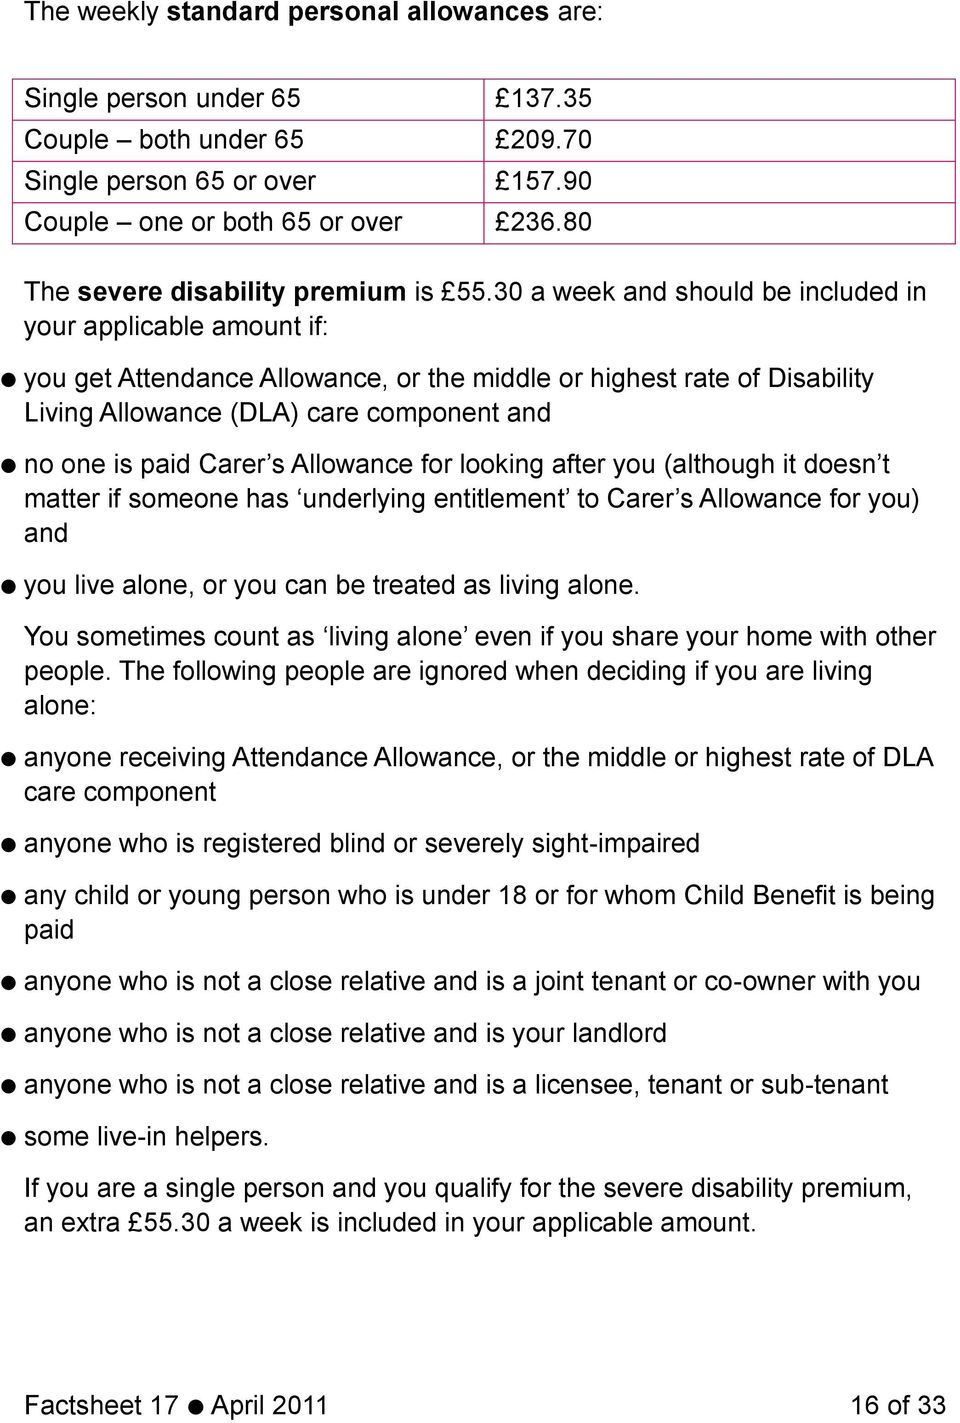 30 a week and should be included in your applicable amount if: you get Attendance Allowance, or the middle or highest rate of Disability Living Allowance (DLA) care component and no one is paid Carer